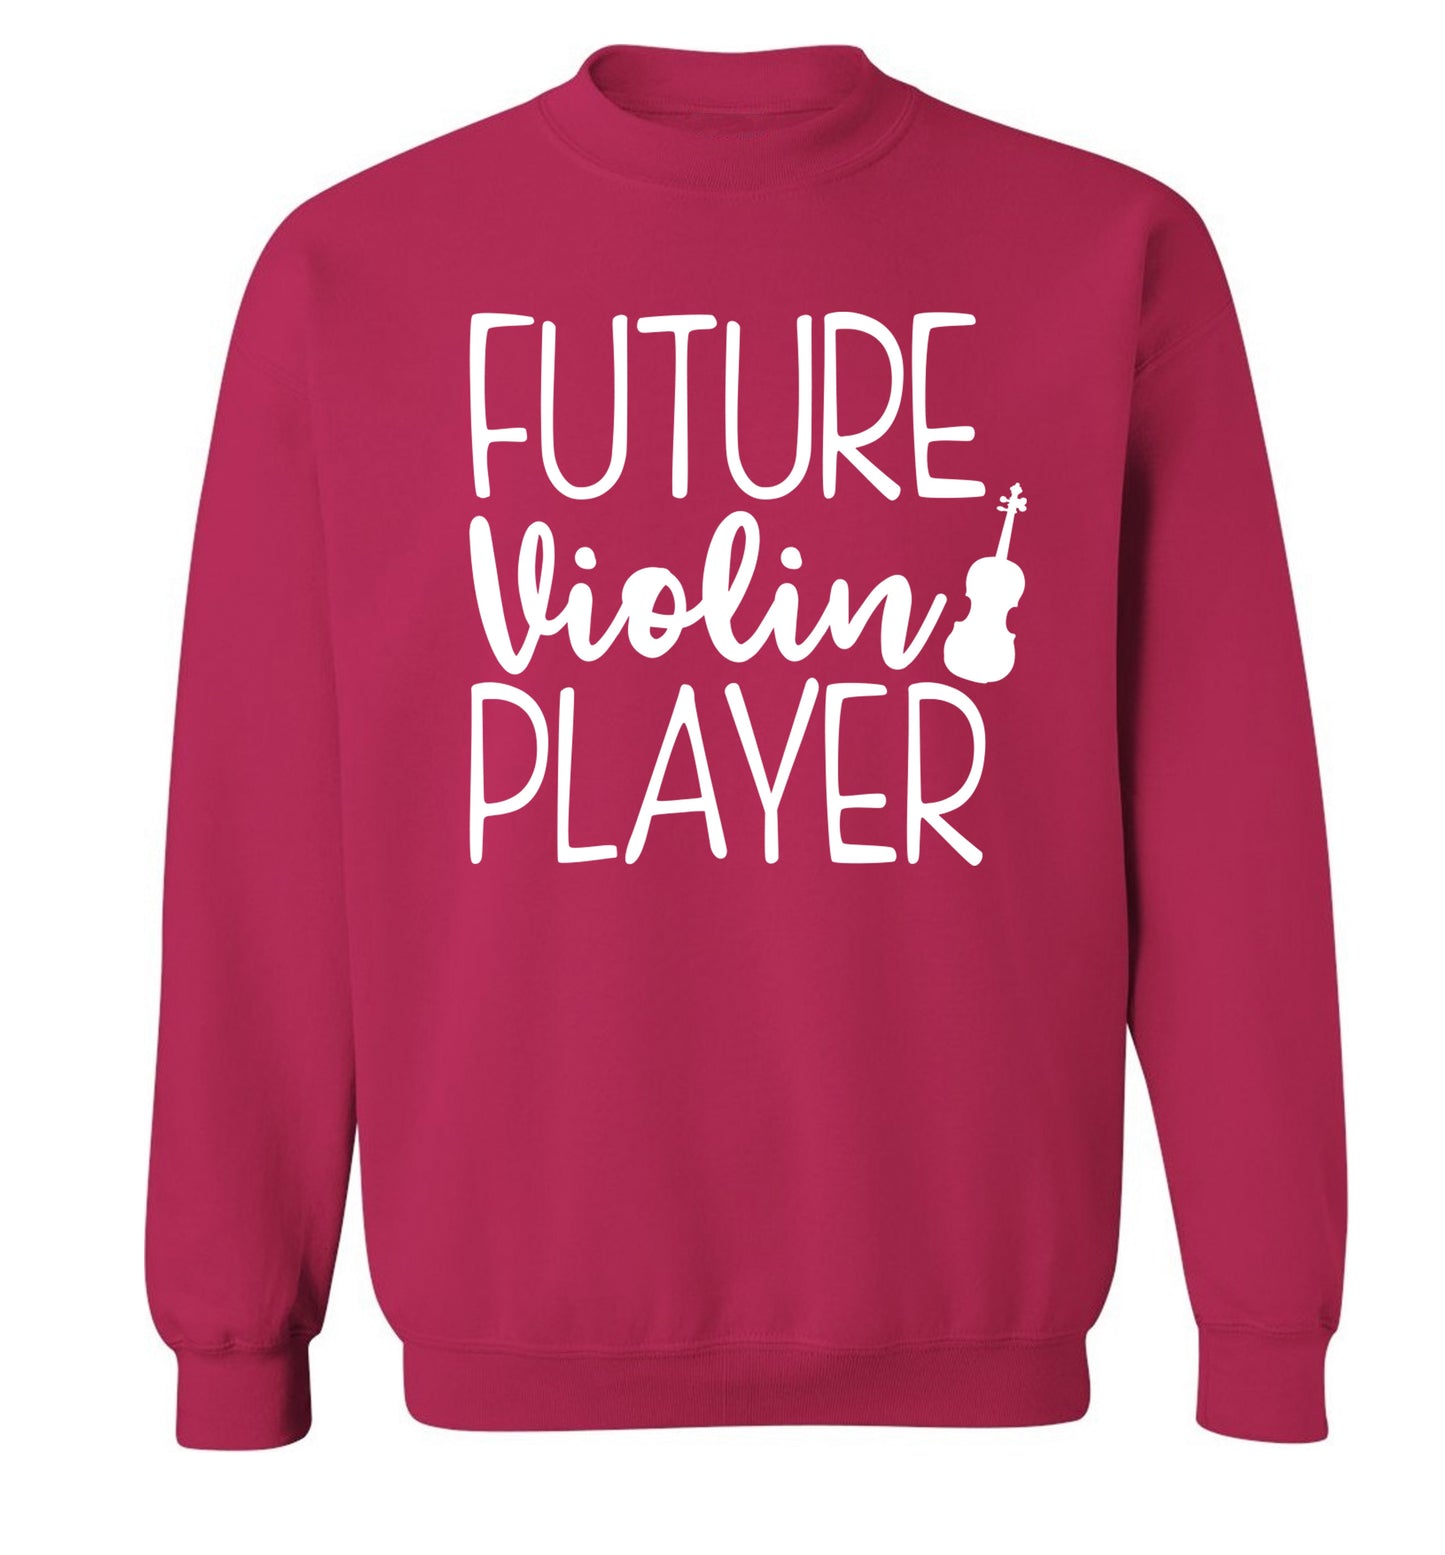 Future Violin Player Adult's unisex pink Sweater 2XL